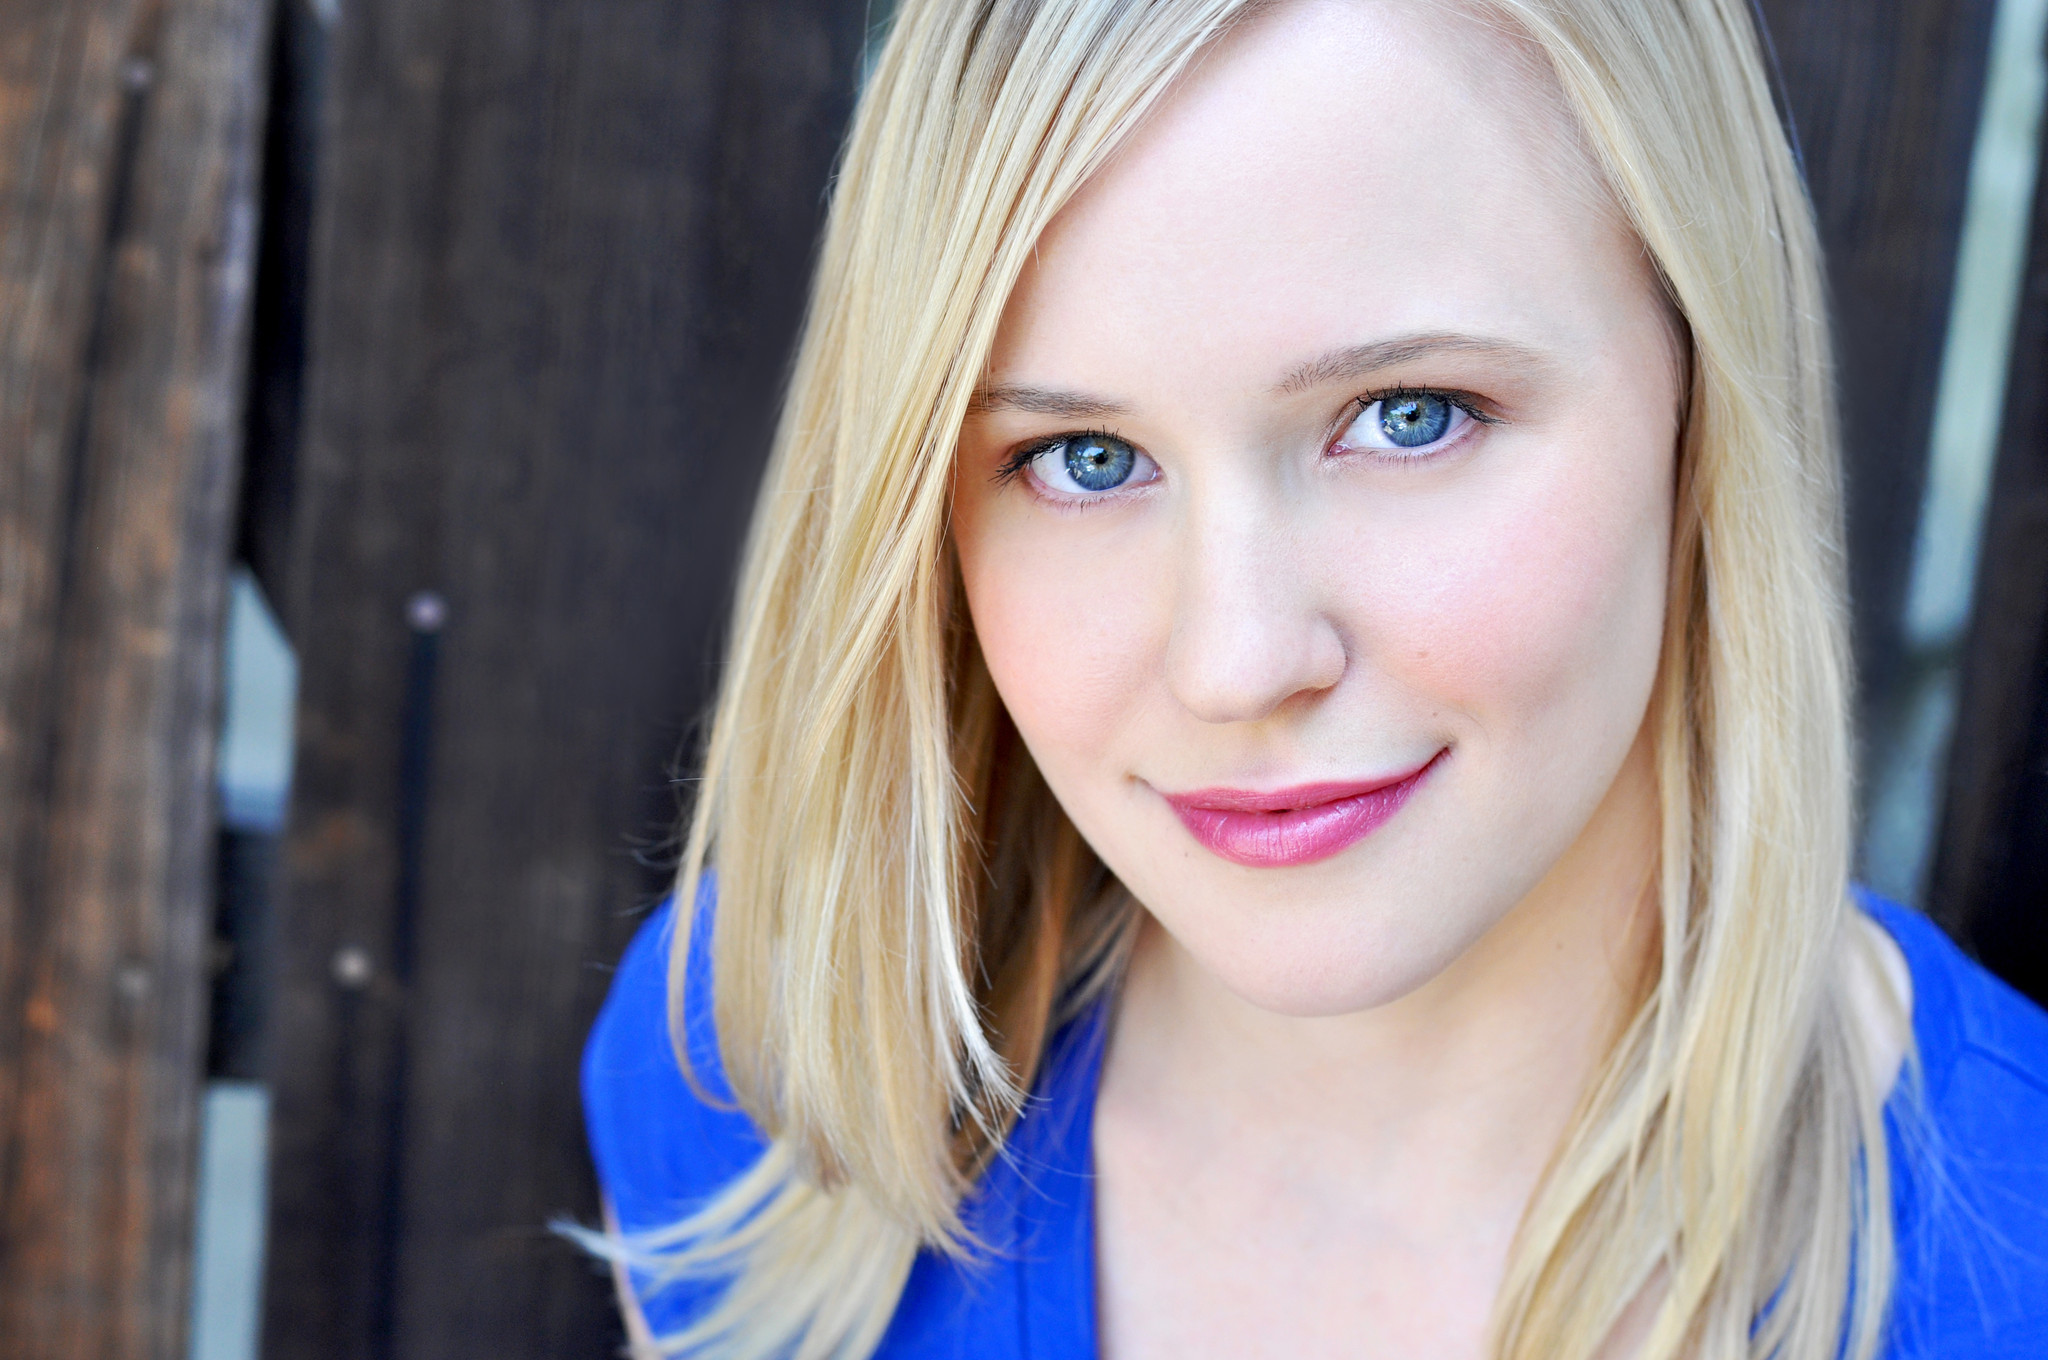 Chicago theater actor Kelly O'Sullivan cast as the lead in new sitcom